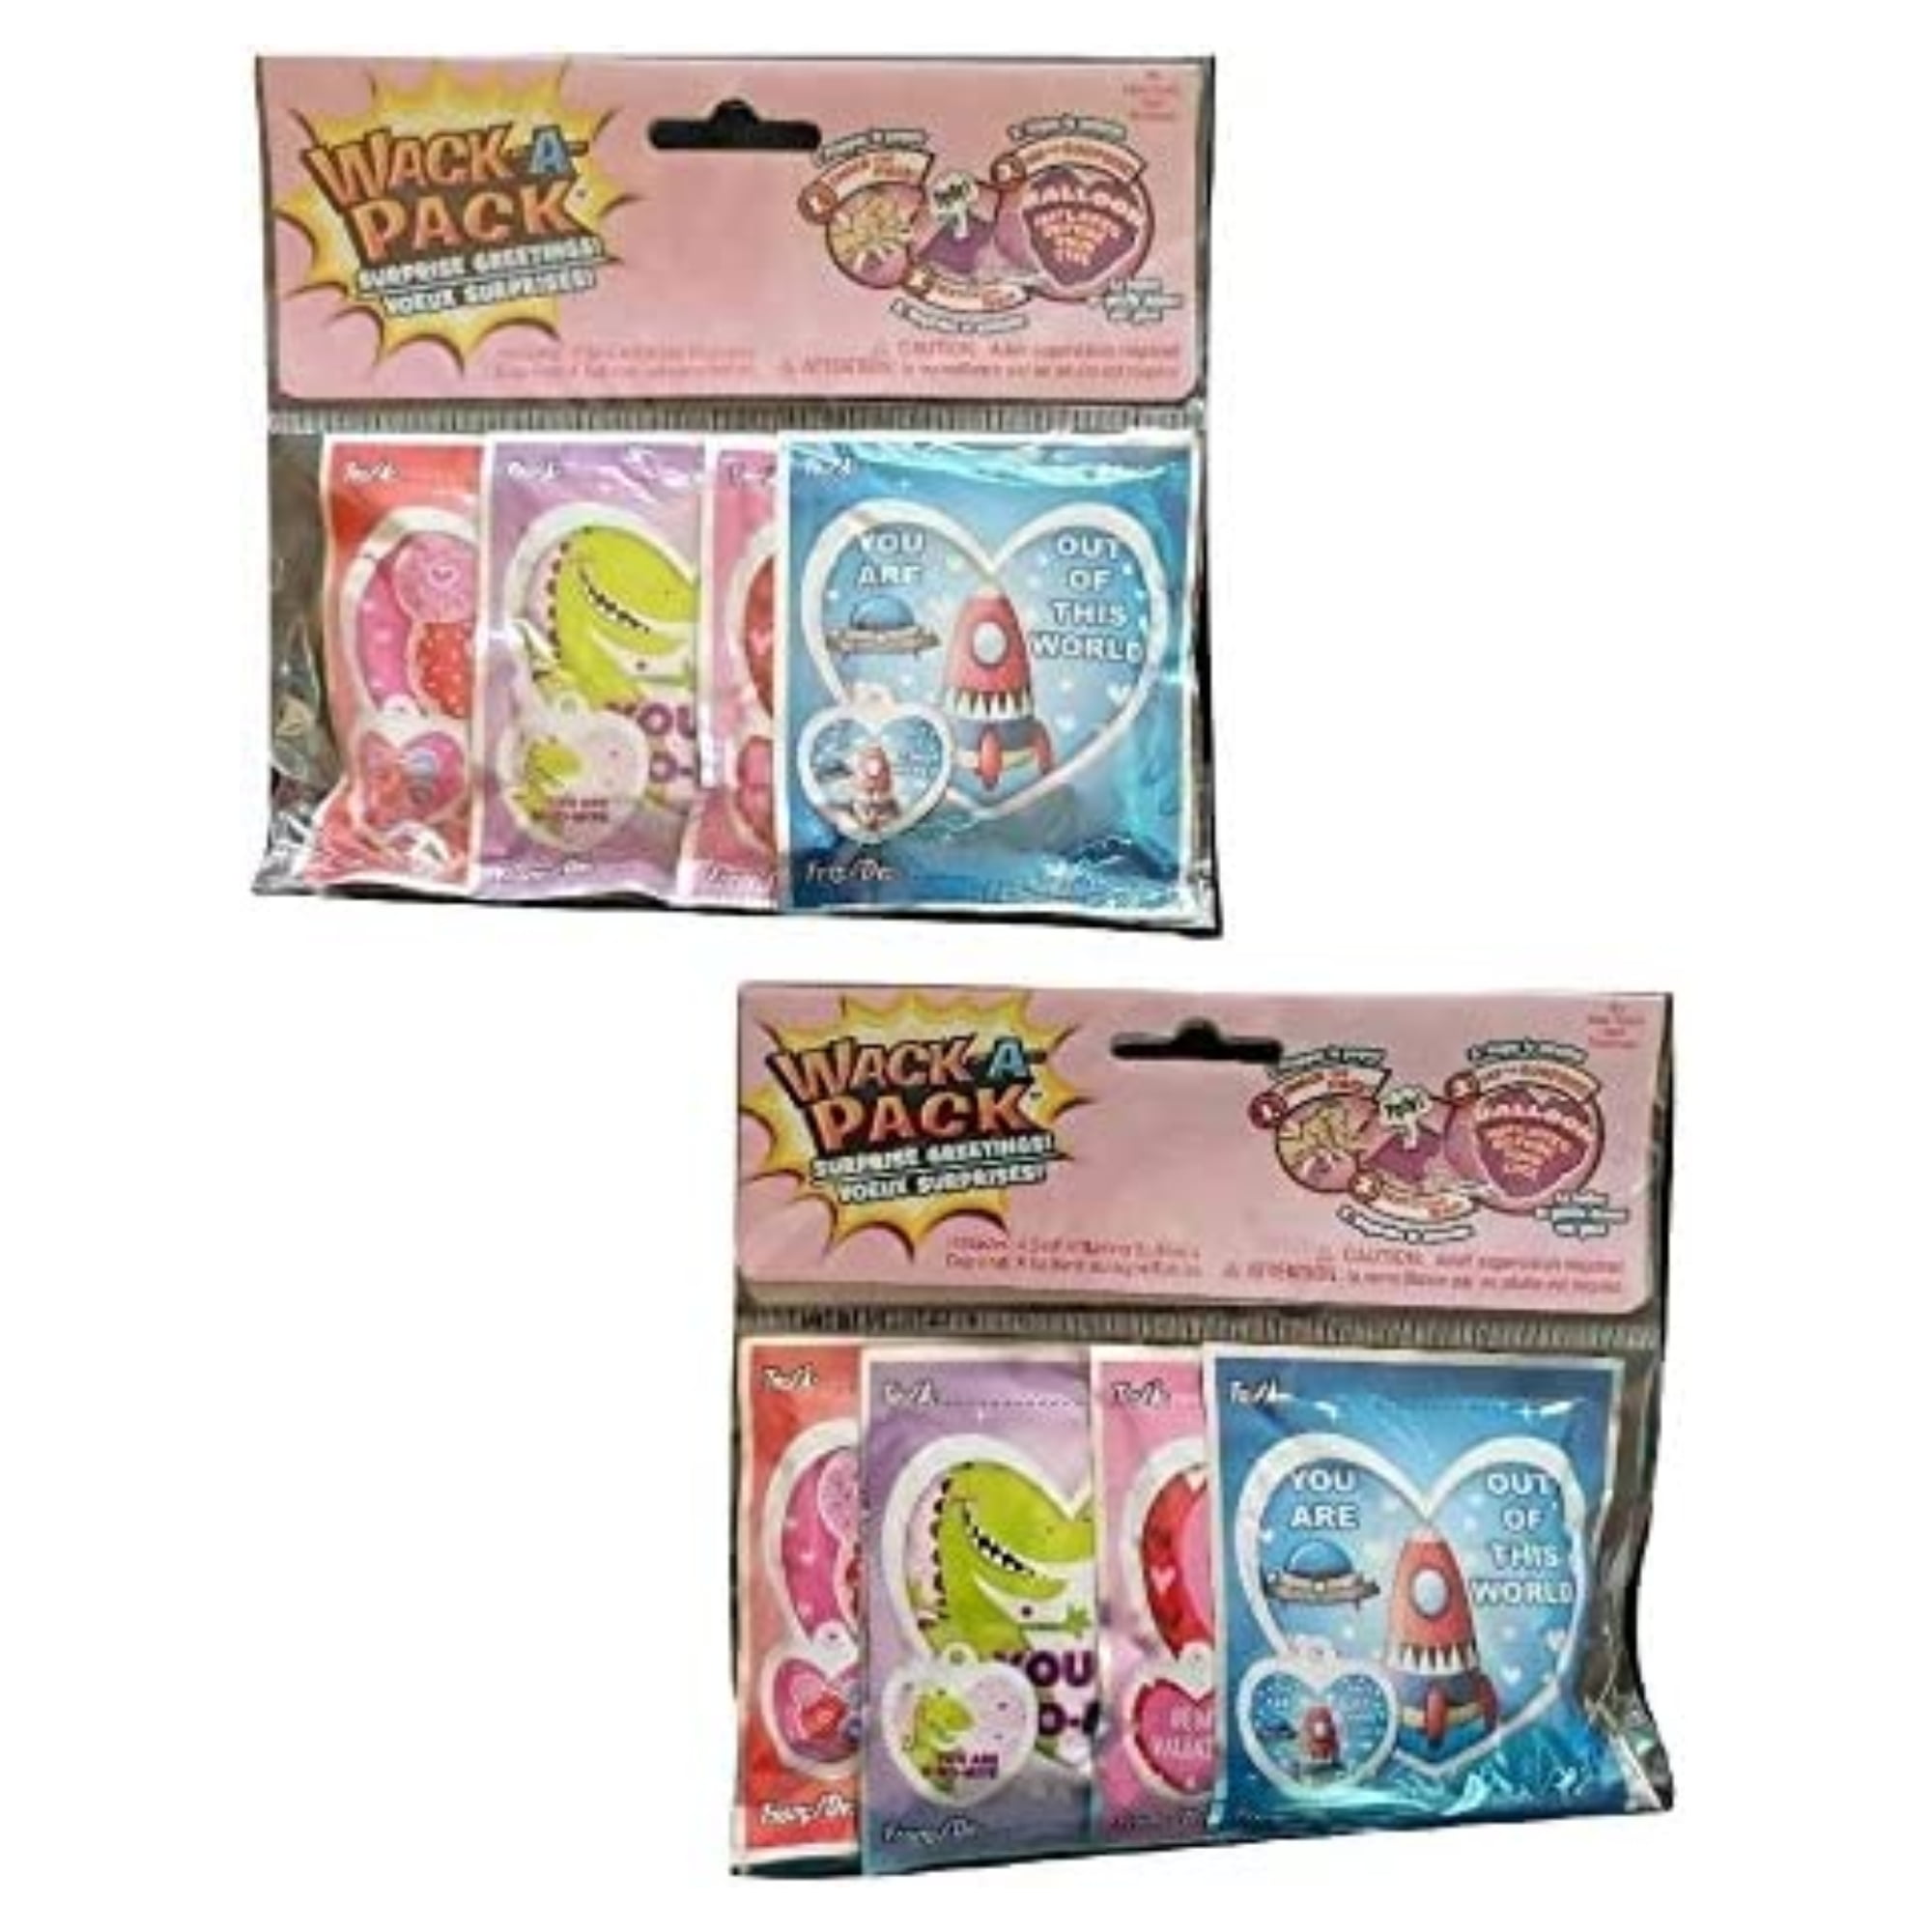 Christmas Wack-A-Pack Balloon Surprise! 3 Pack of 4 Self-inflating Foil  Balloons